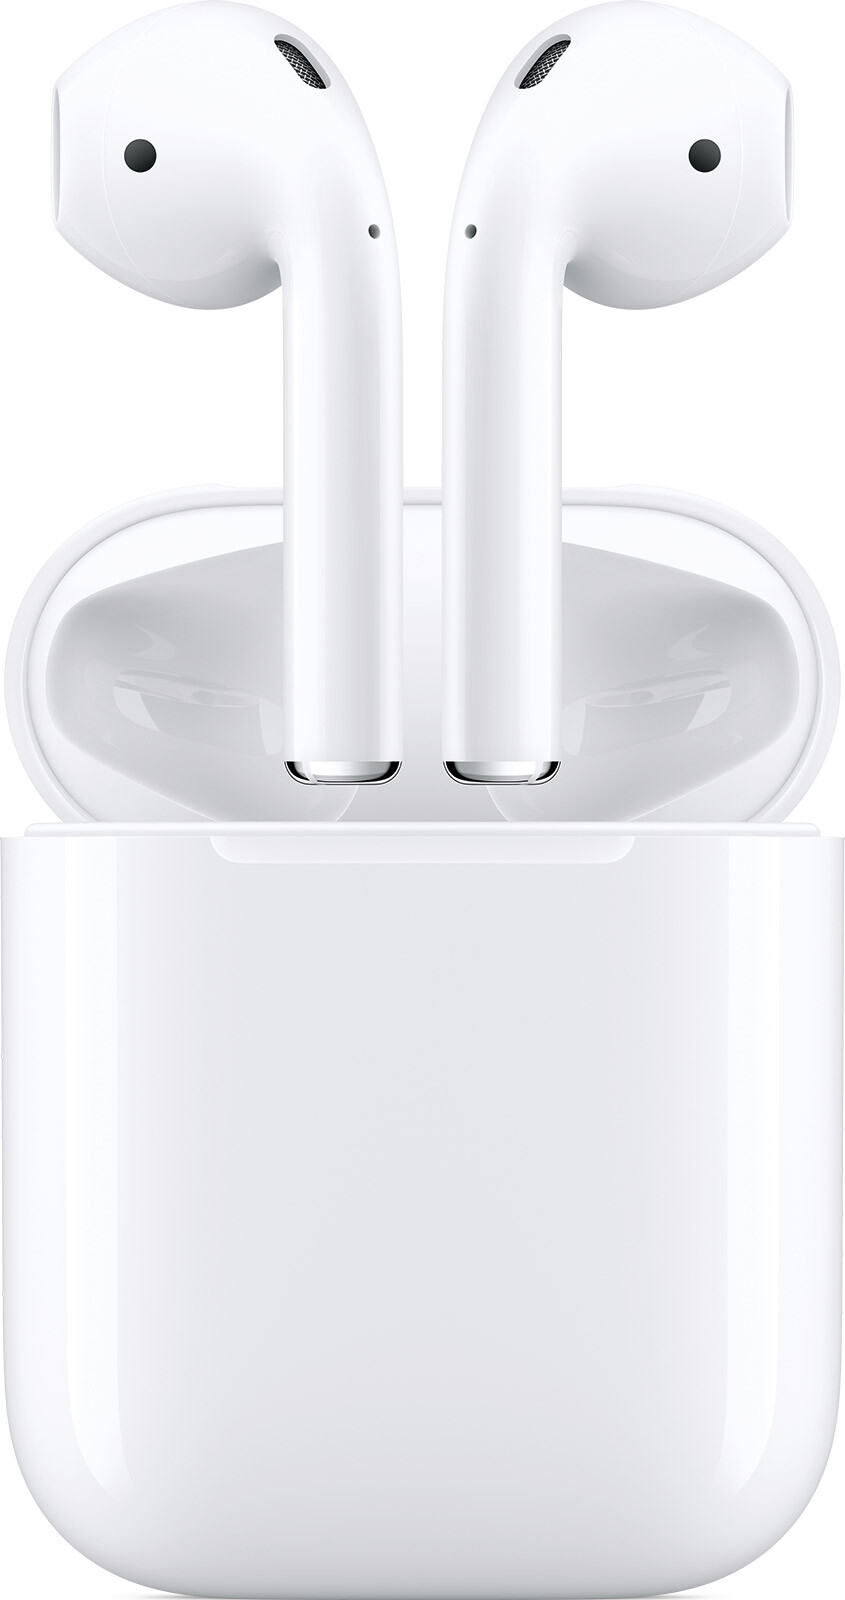 Neuestes Modell Apple AirPods mit kabellosem Ladecase 